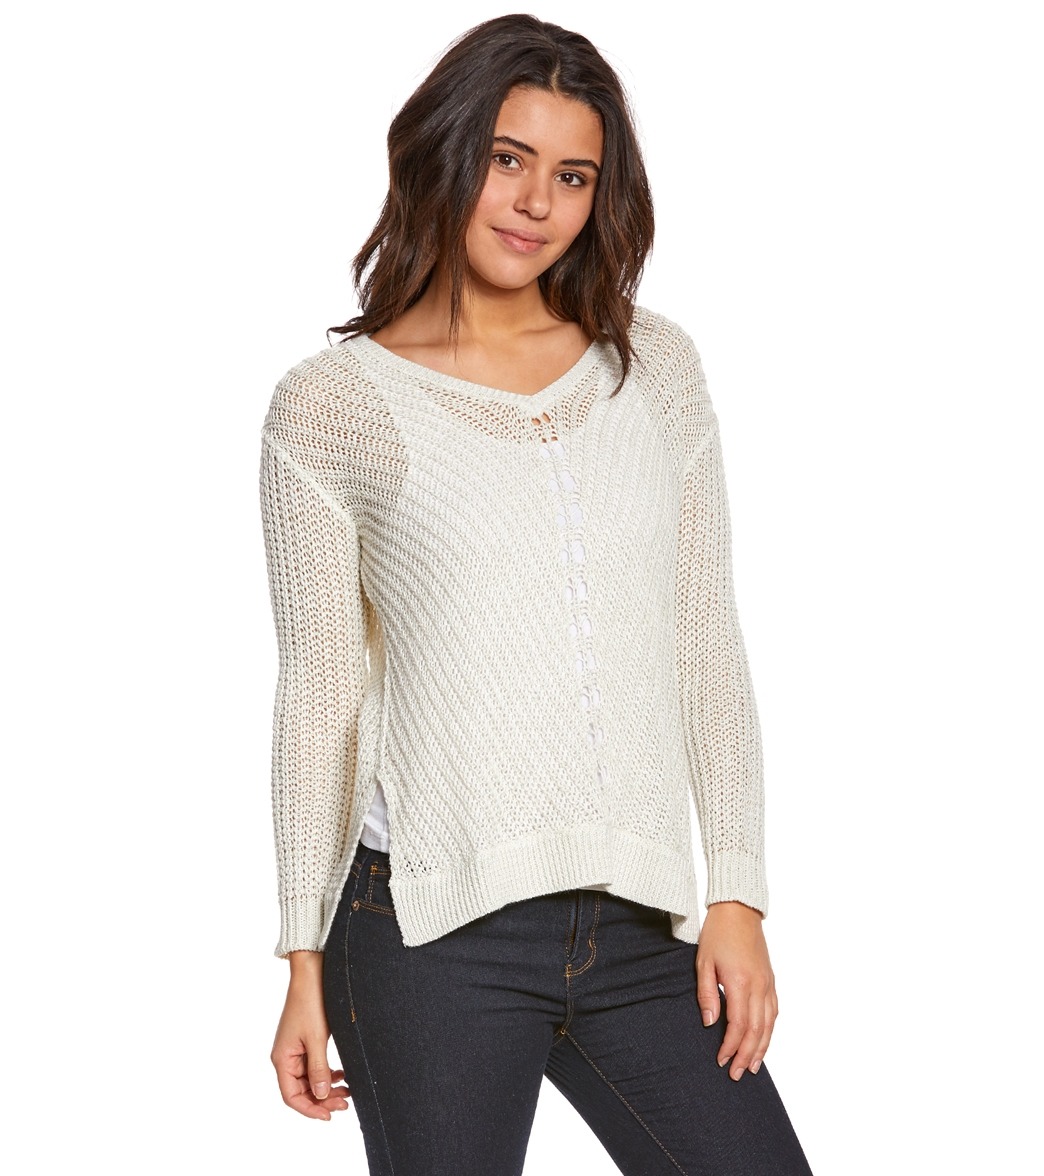 O'Neill Maybelle V-Neck Sweater at SwimOutlet.com - Free Shipping